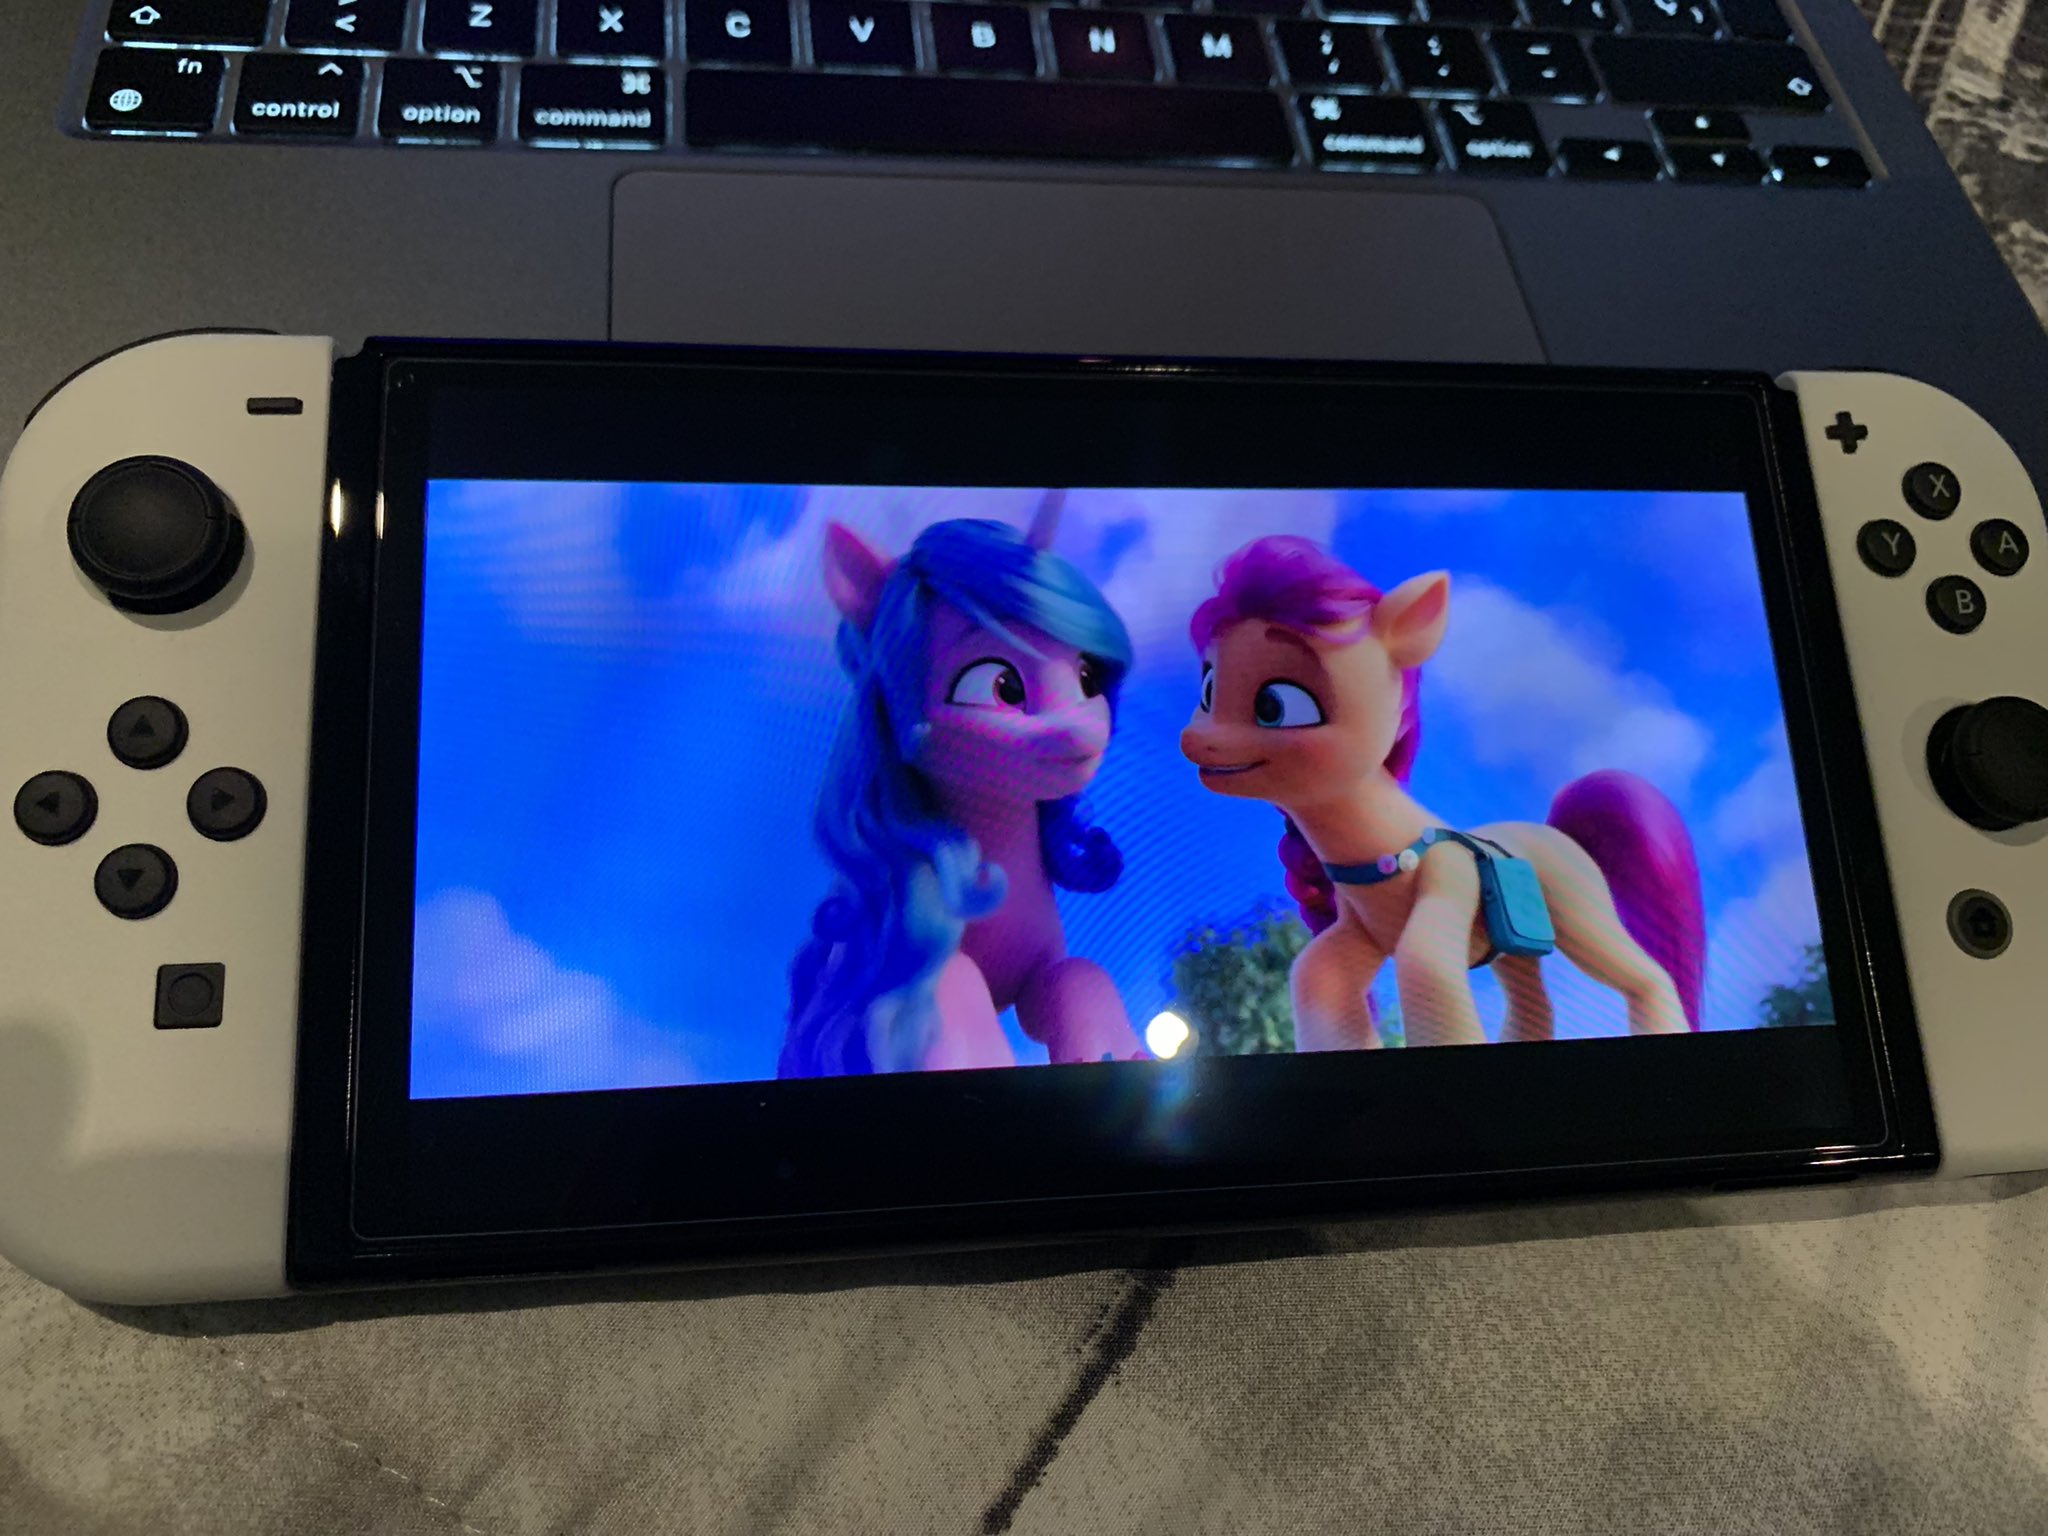 LunaBrony☾ 🔜 CanterFest 2023 🇲🇽 on Twitter: "This is watch A New Generation” in a Nintendo Switch OLED. How about it's better contrast and image quality in its OLED technology? #